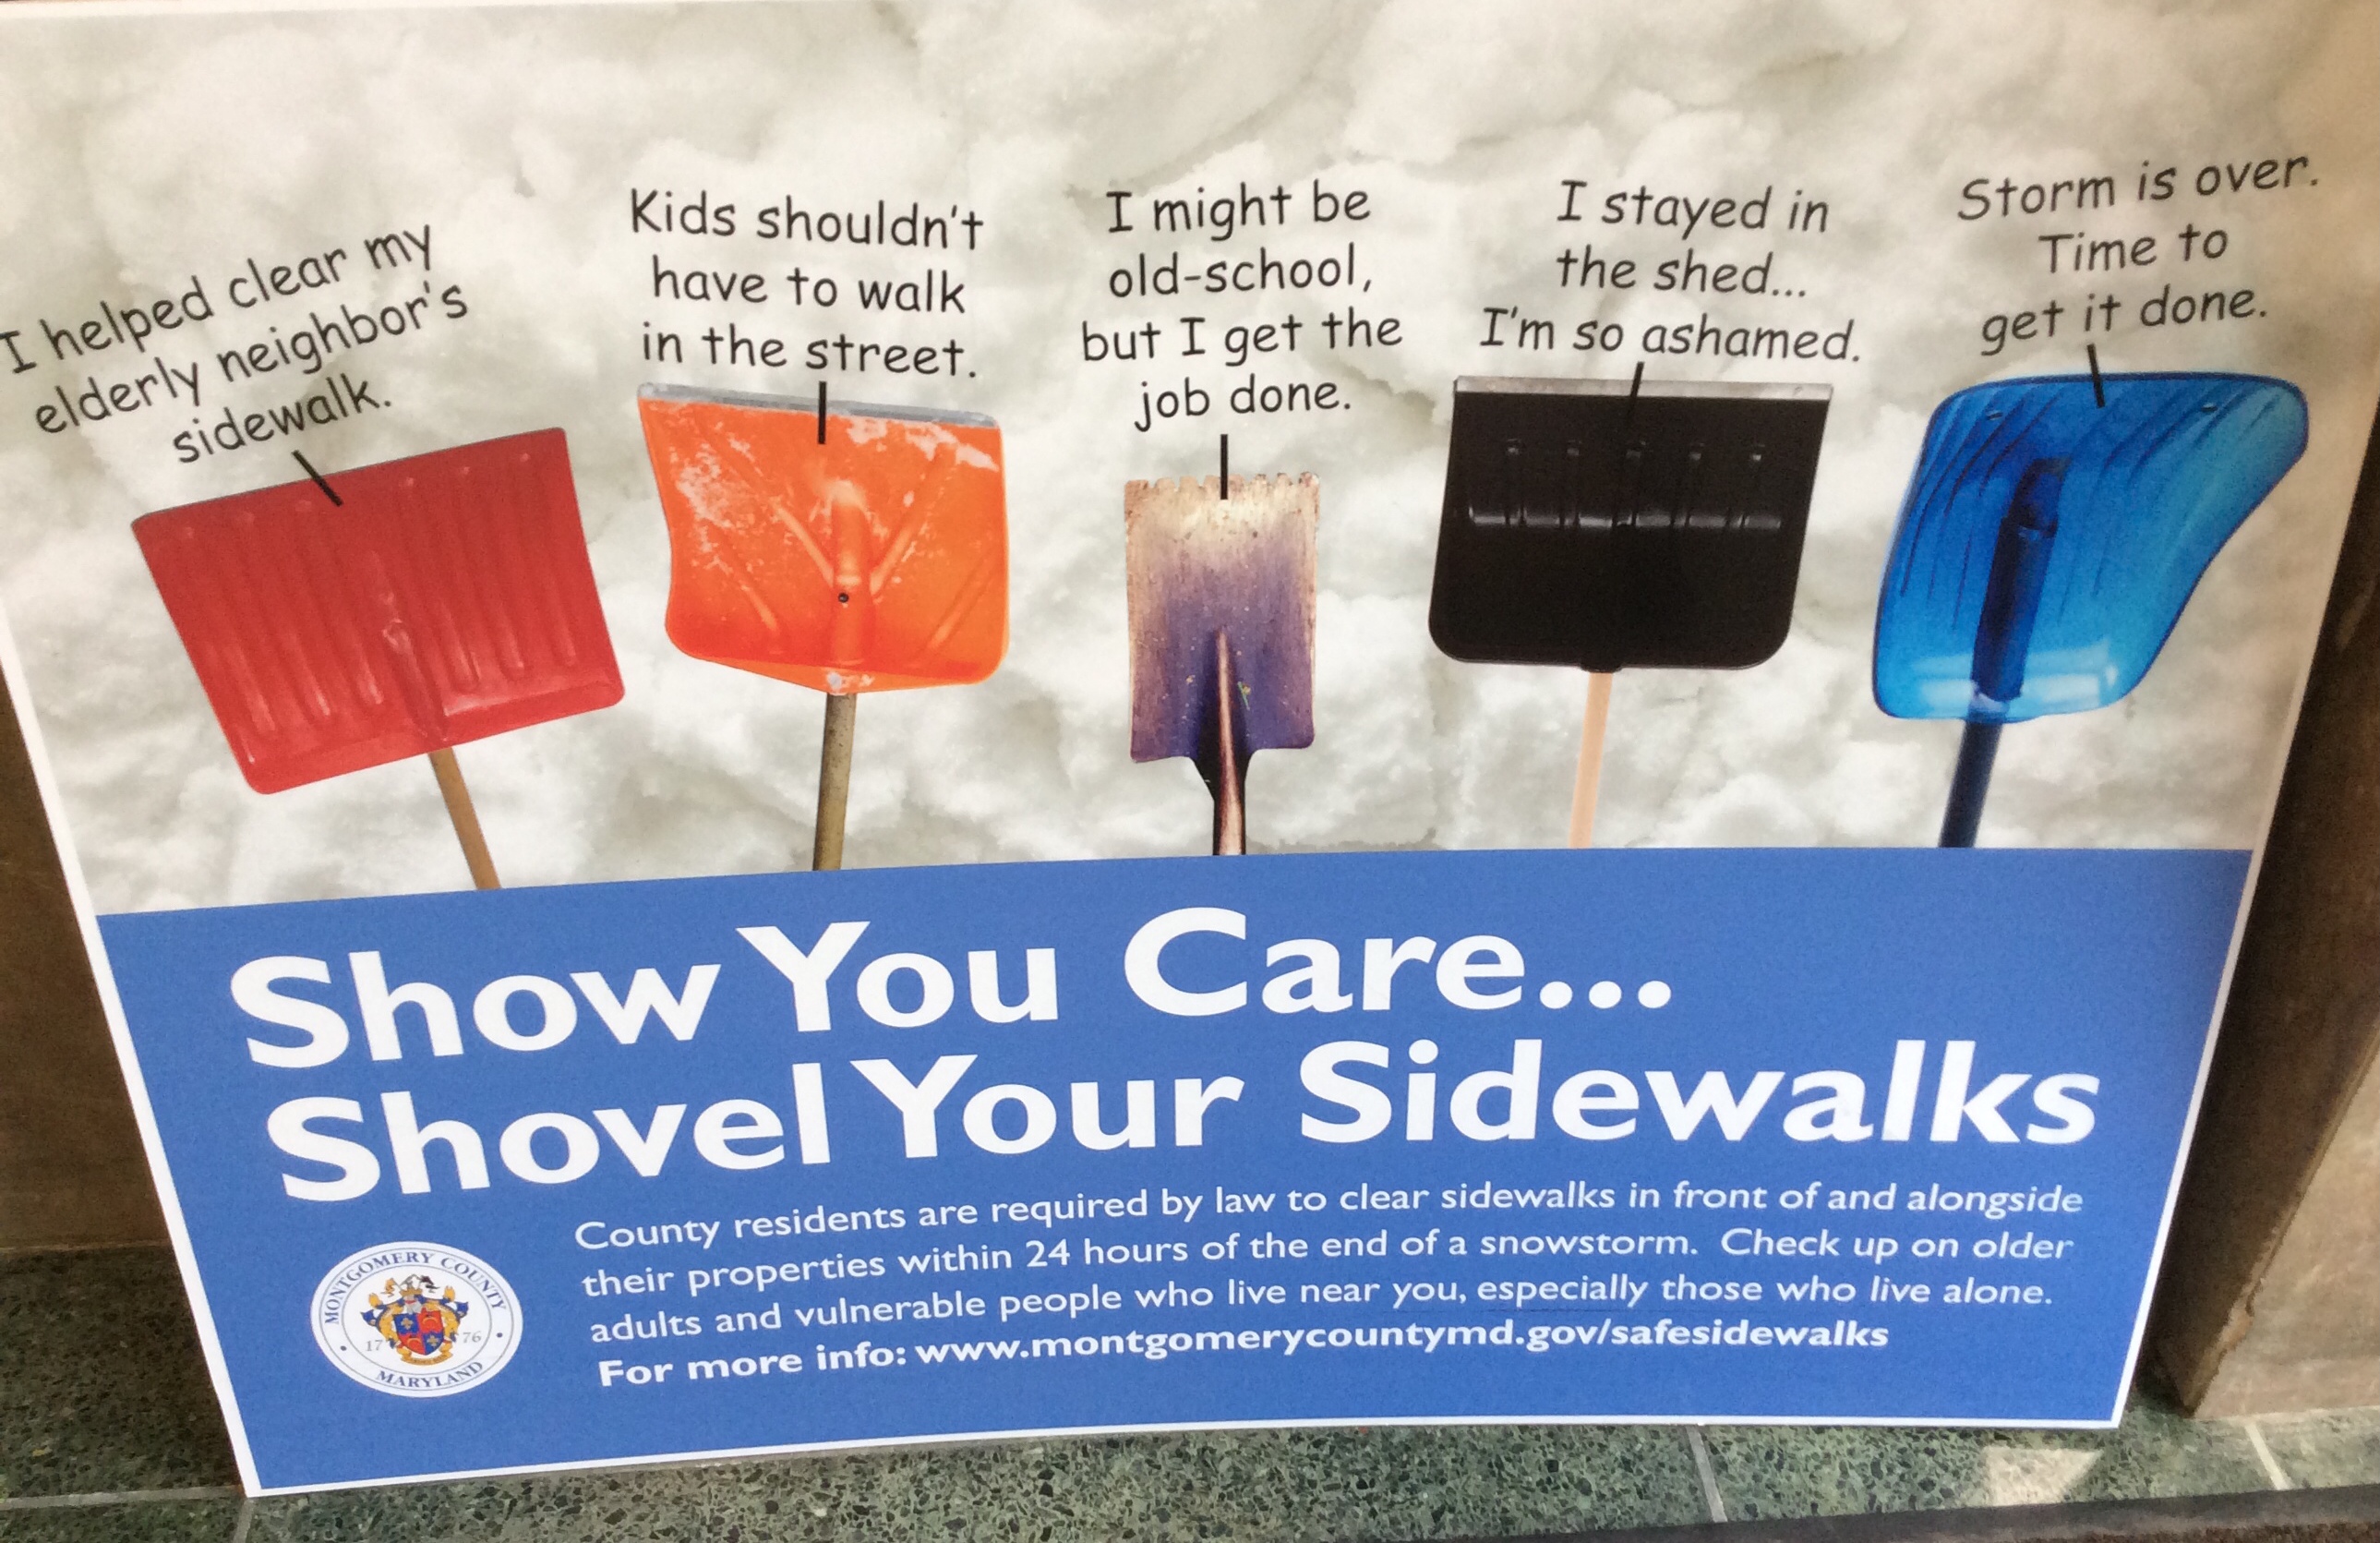 local-leaders-launch-safe-sidewalks-campaign-photos-video